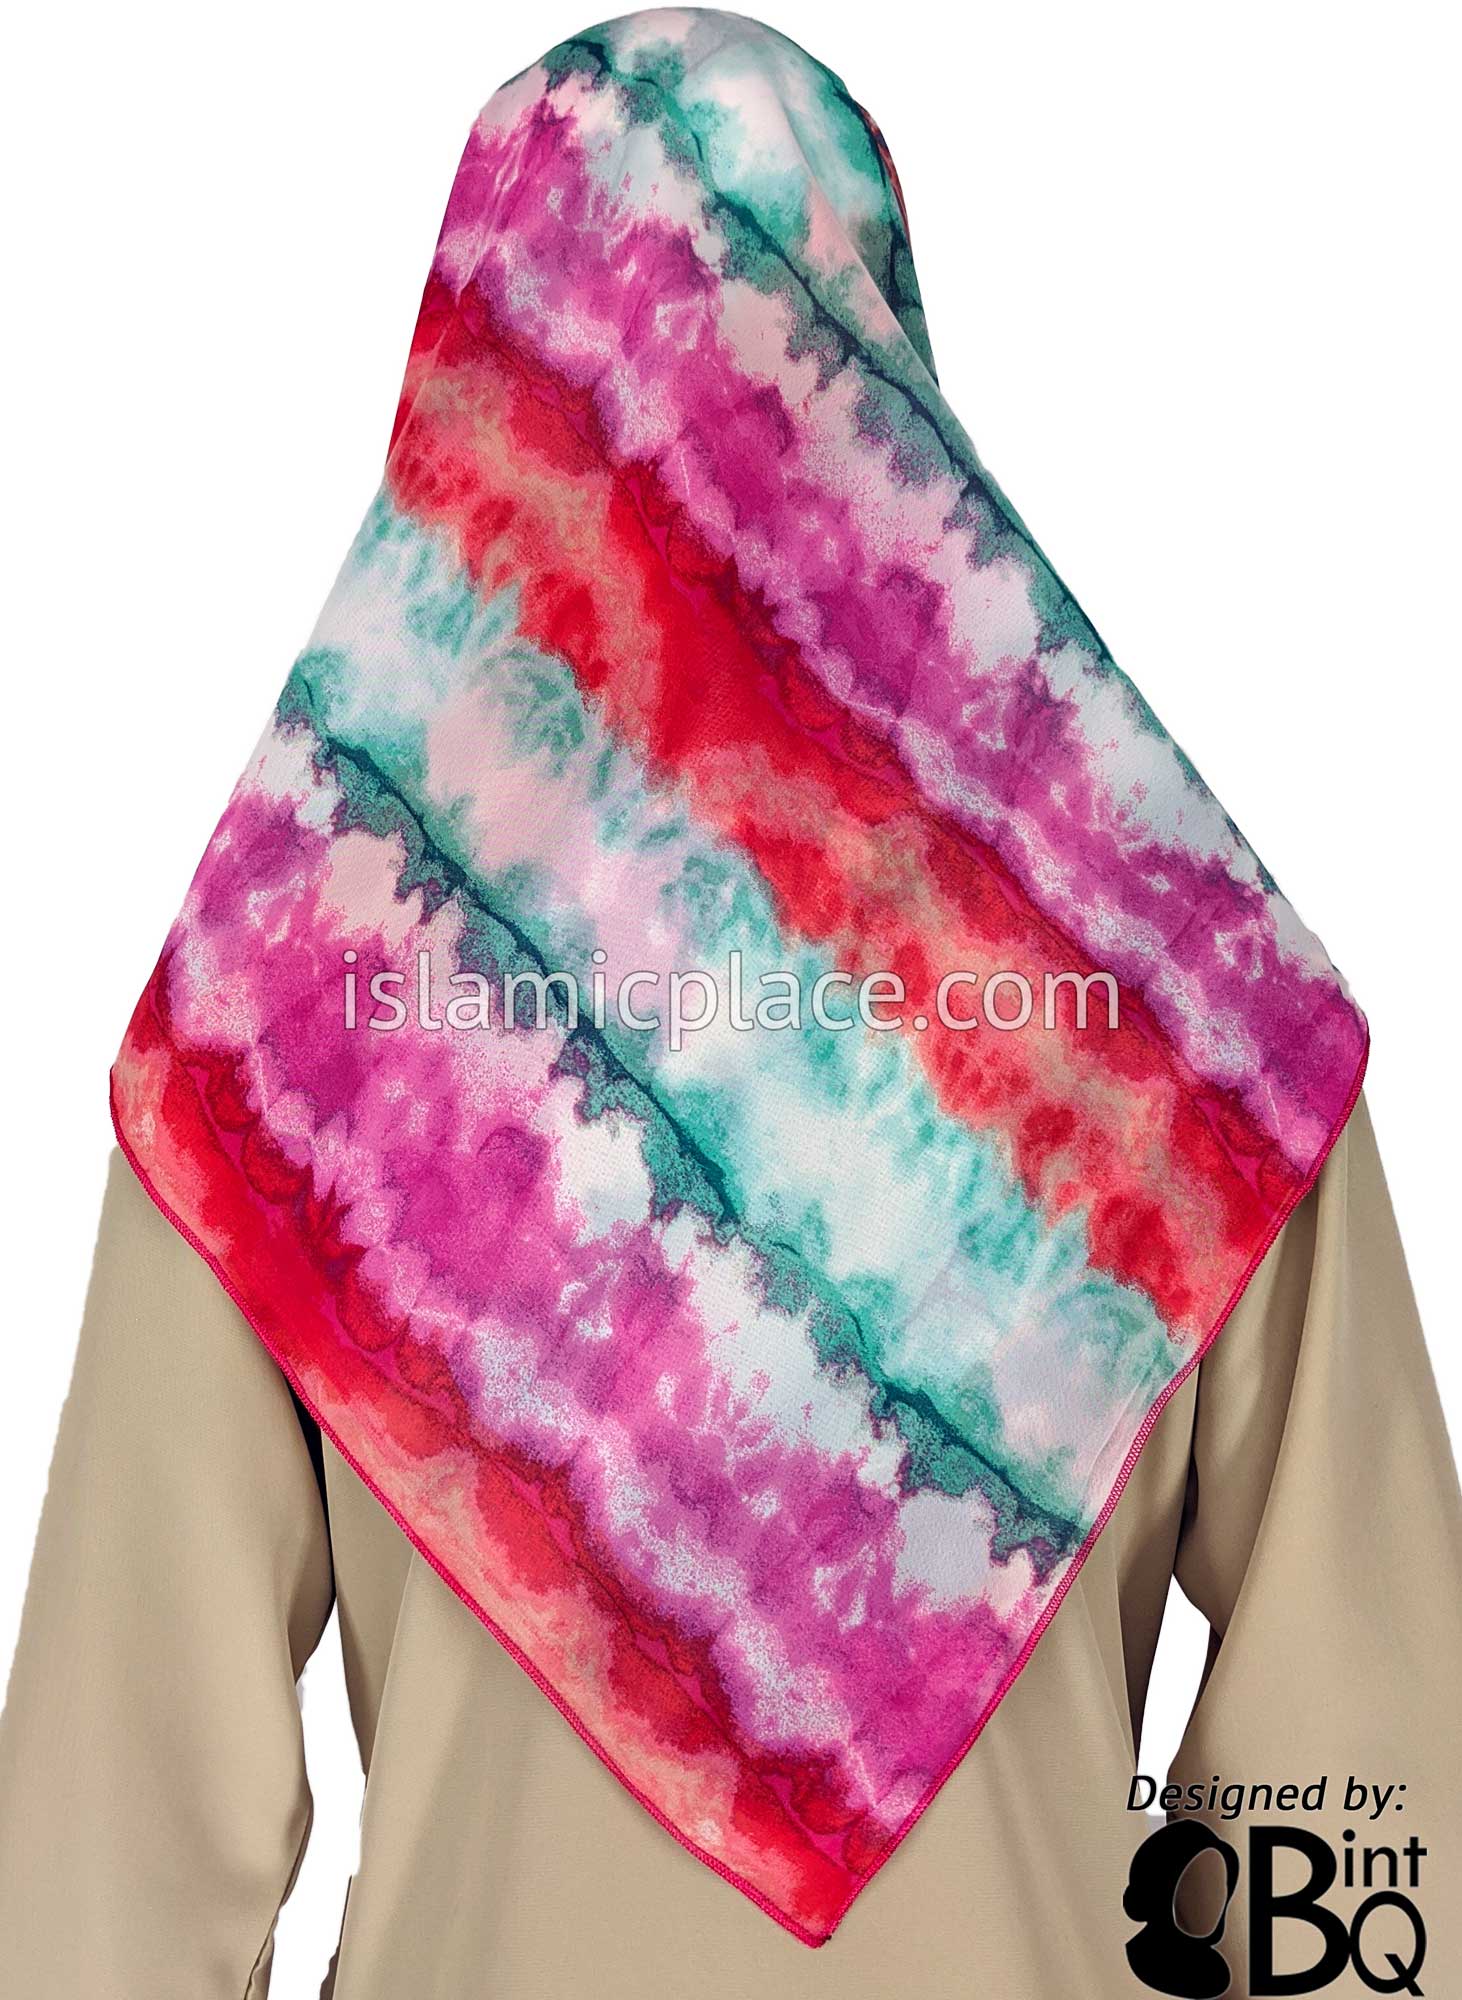 Red, Pink, Aqua Green, Teal and White Tie and Dye Design - 45" Square Printed Khimar